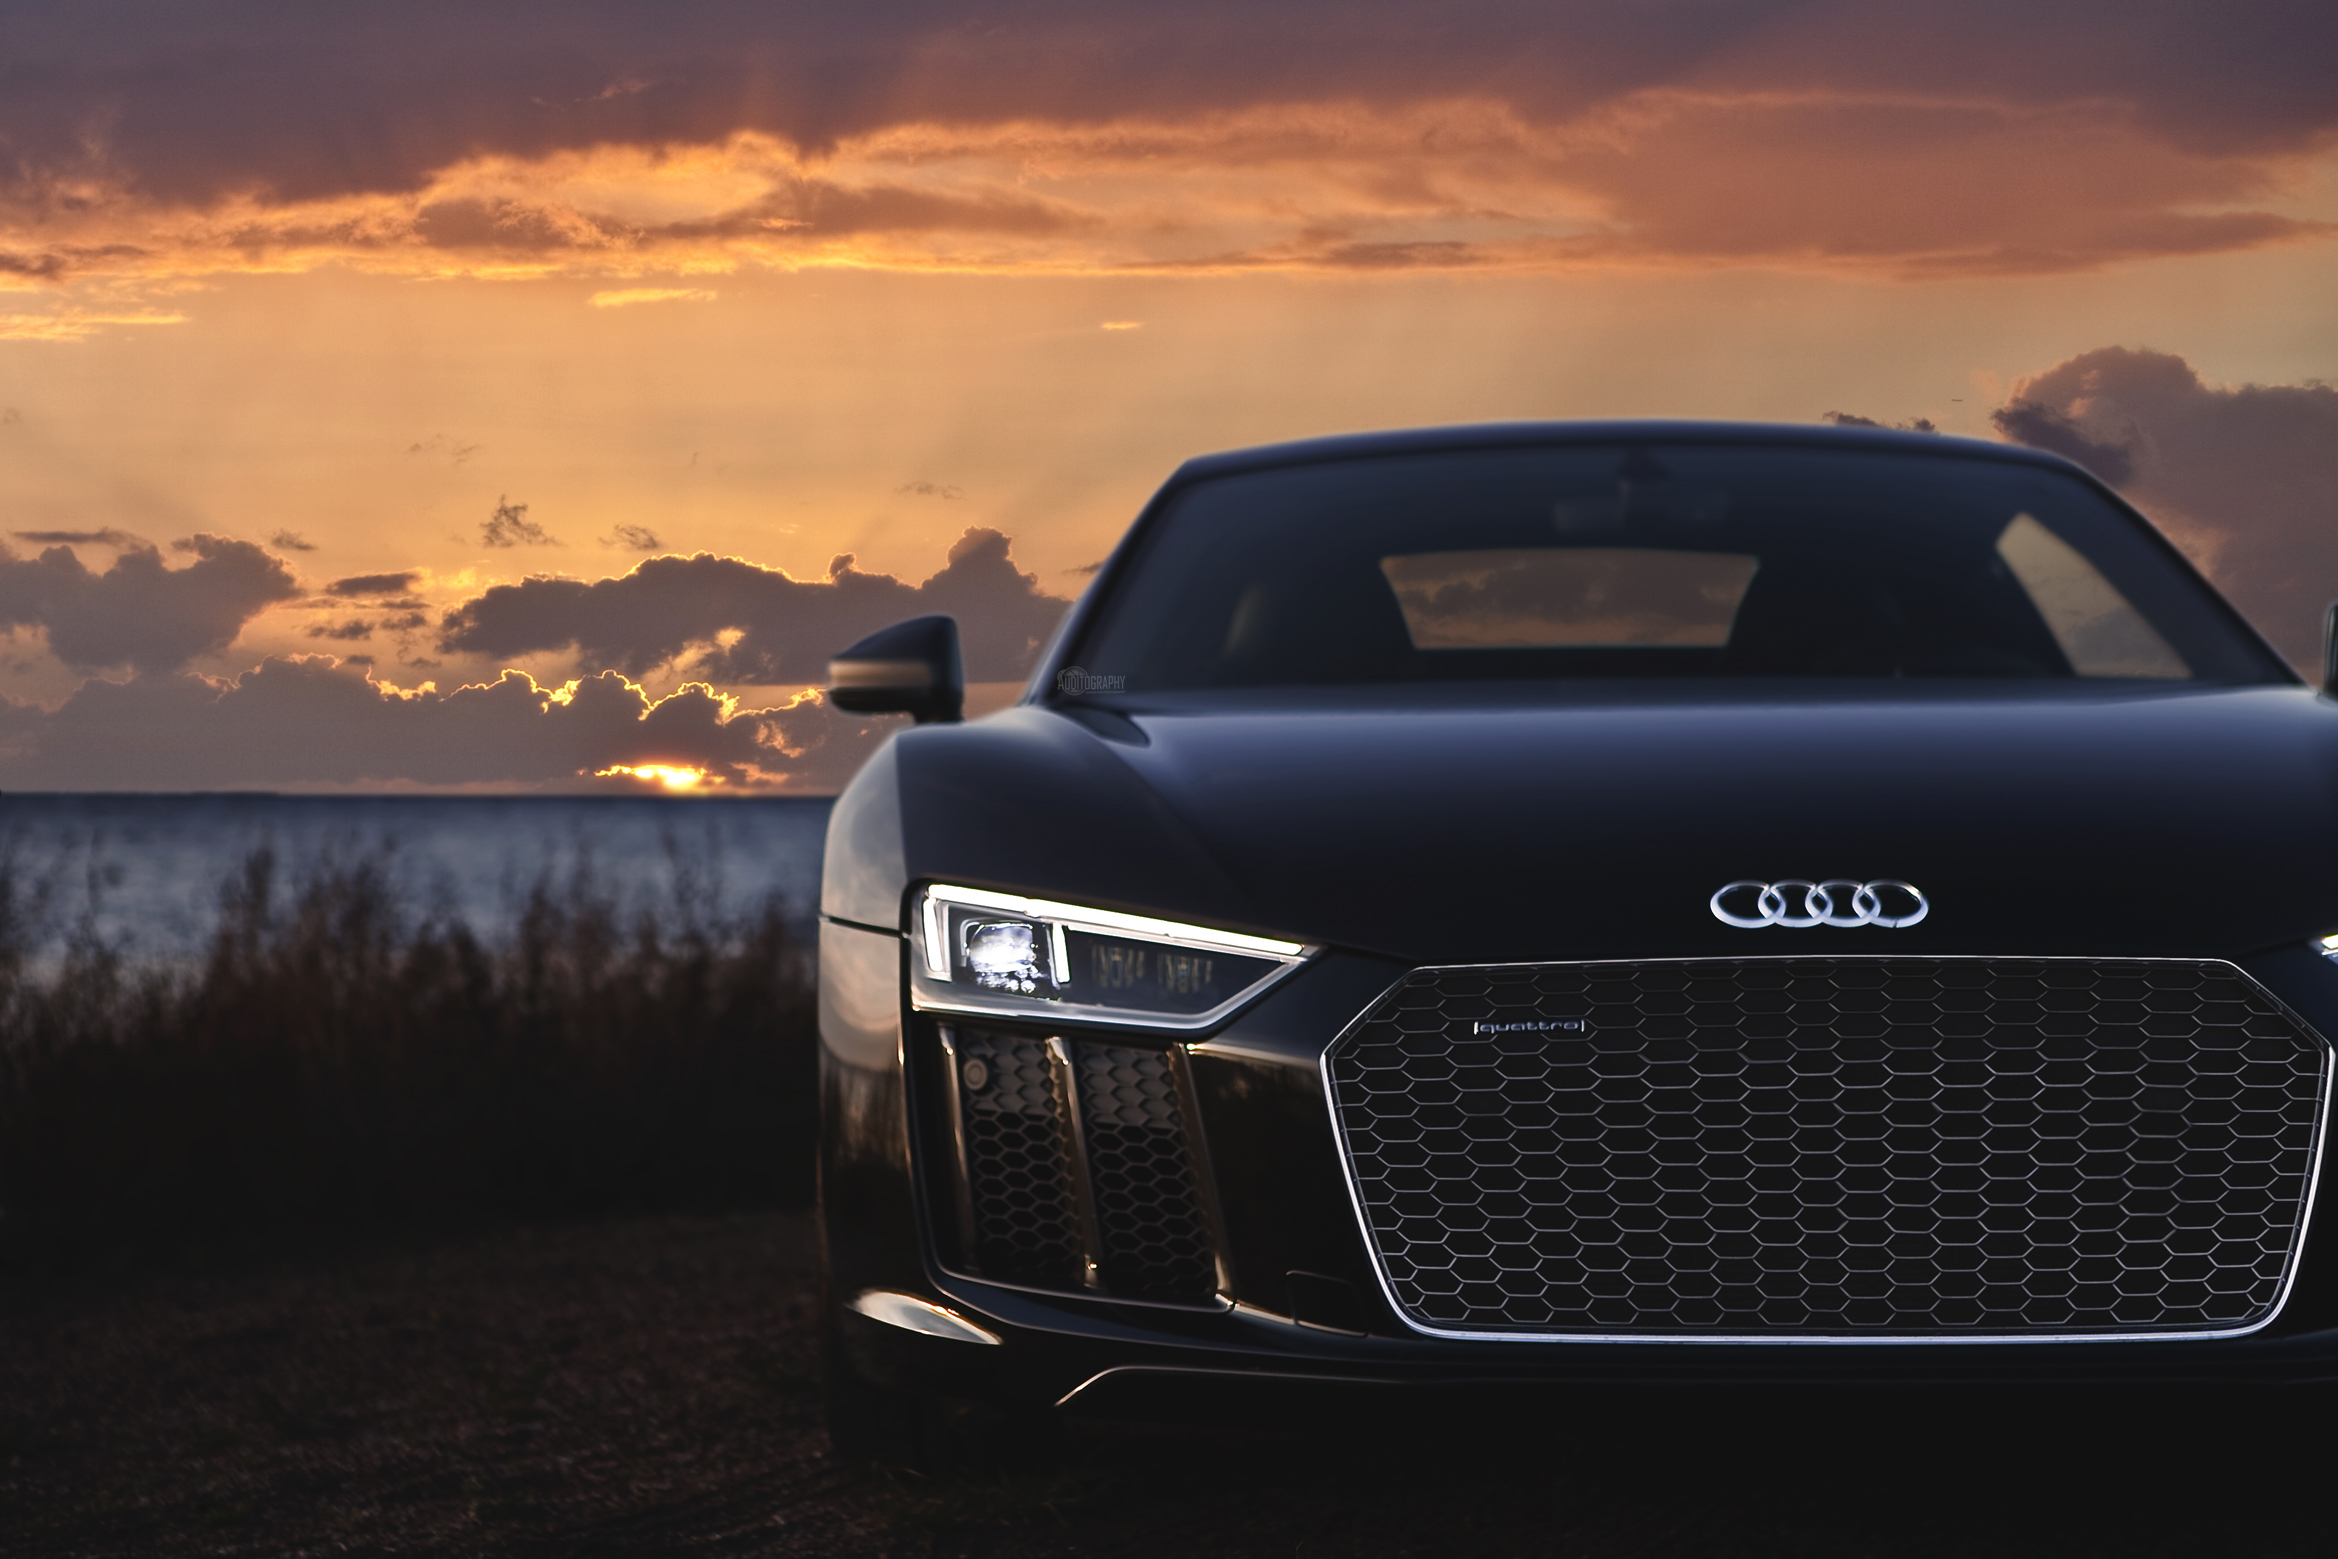 Your Ridiculously Awesome Audi R8 Wallpaper Is Here 2338x1559